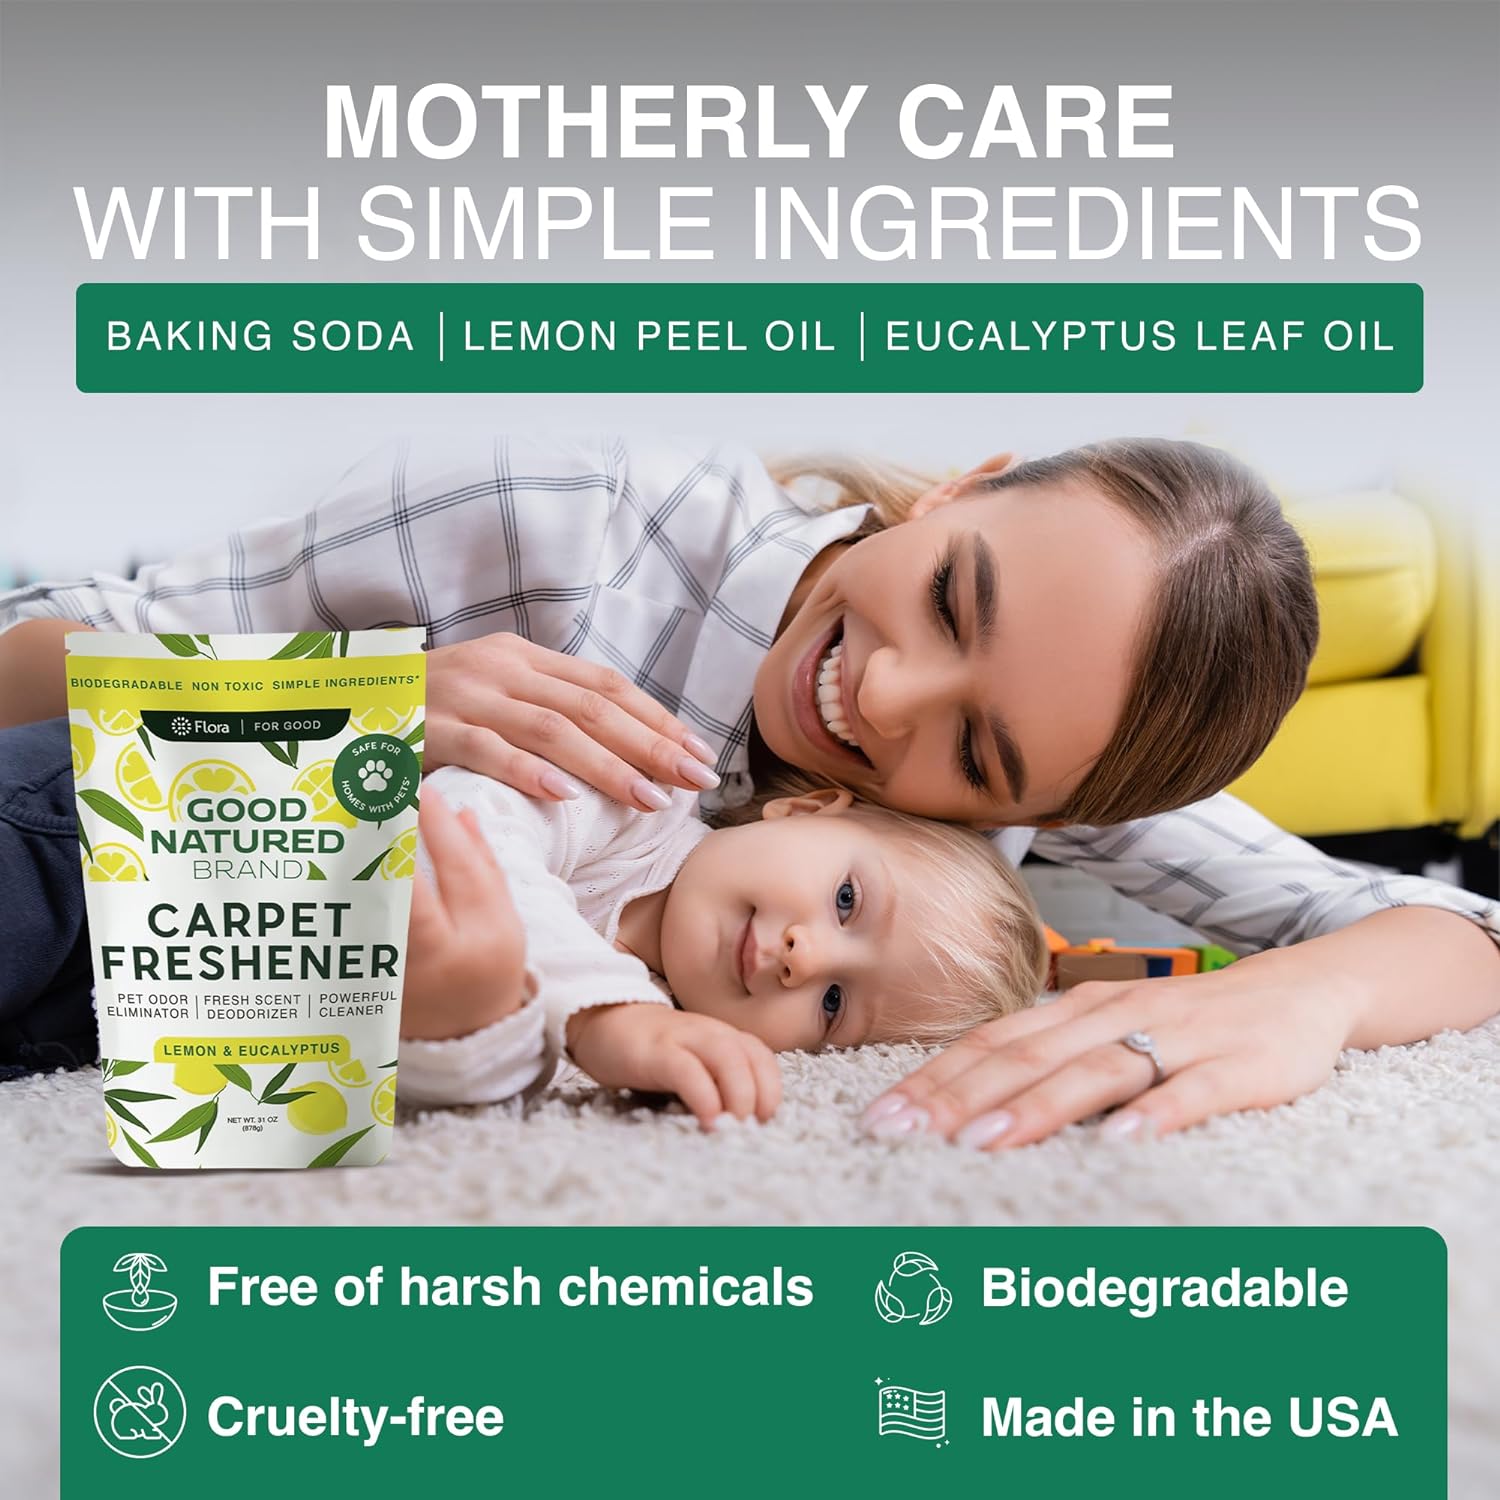 Eco-Friendly Complete Home Care Kit | Carpet Freshener, Laundry Powder, All-Purpose Cleaner, Room & Linen Spray